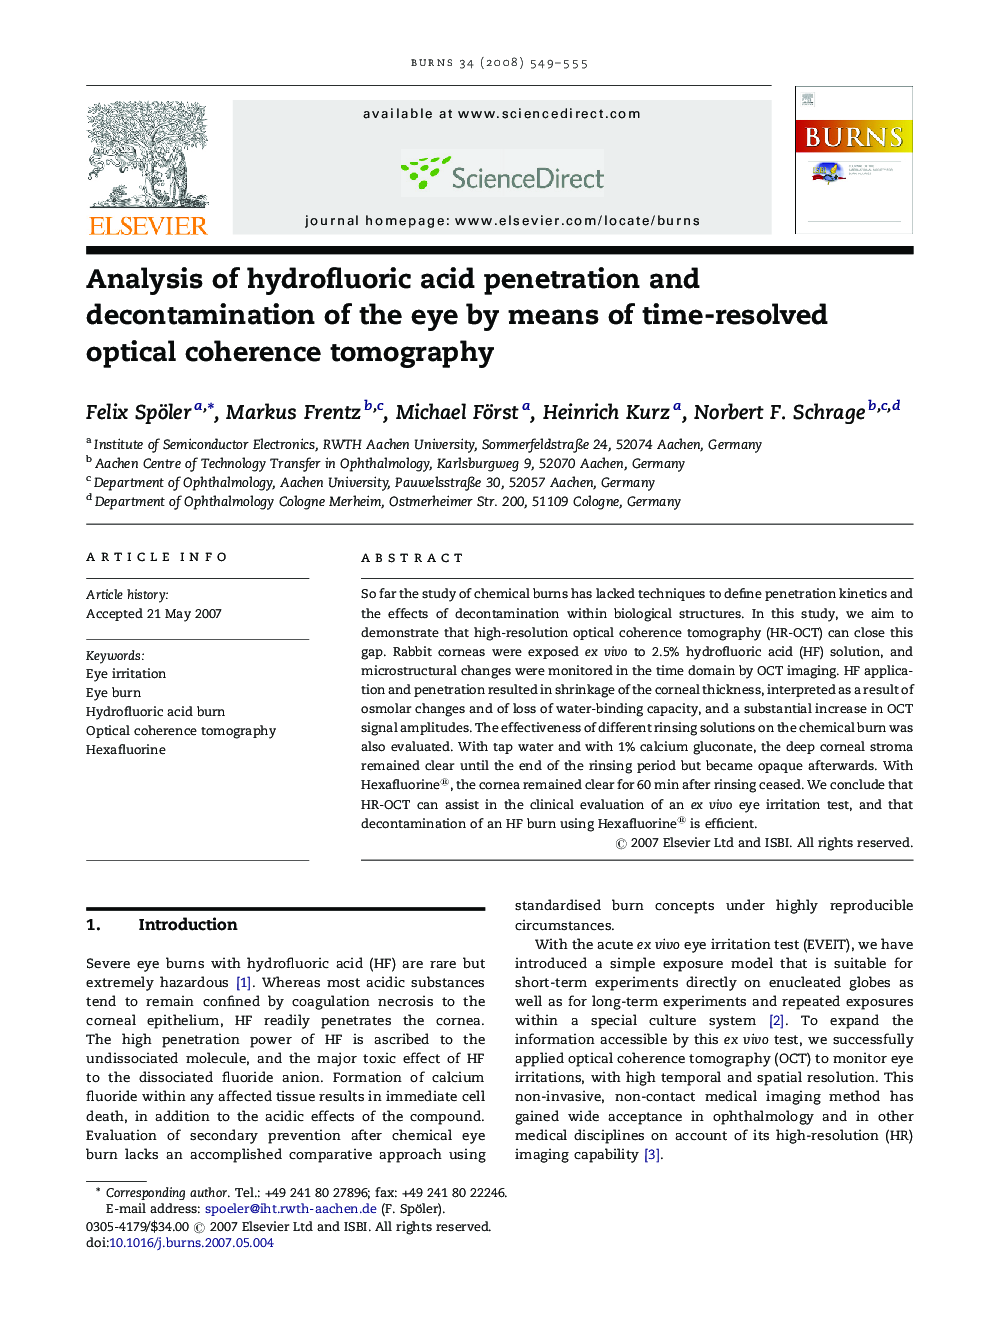 Analysis of hydrofluoric acid penetration and decontamination of the eye by means of time-resolved optical coherence tomography